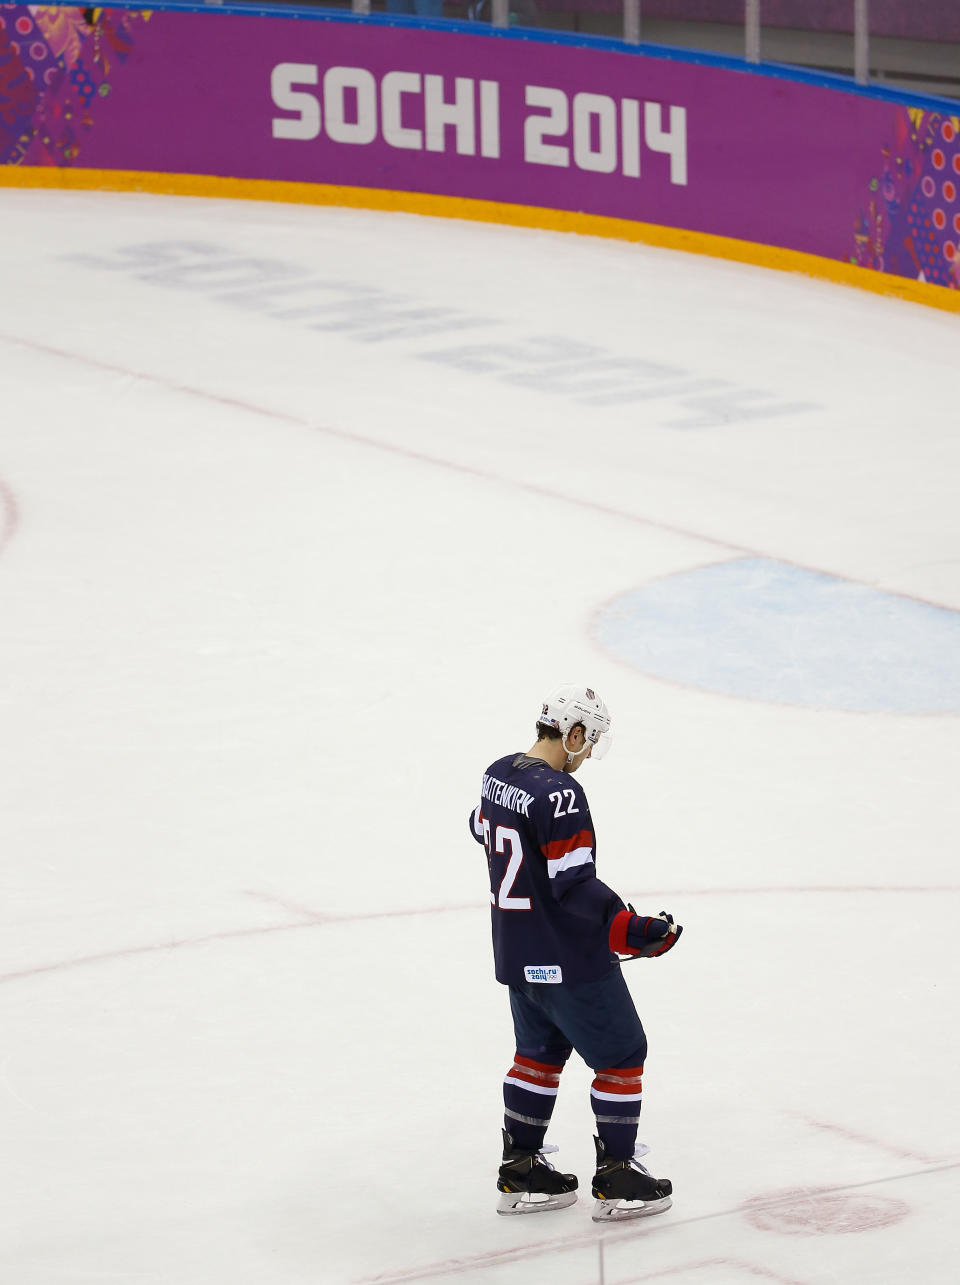 Kevin Shattenkirk of the United States (22) skates off the ice after the team's 5-0 loss to Finland in the men's bronze medal ice hockey game at the 2014 Winter Olympics, Saturday, Feb. 22, 2014, in Sochi, Russia. (AP Photo/Matt Slocum)